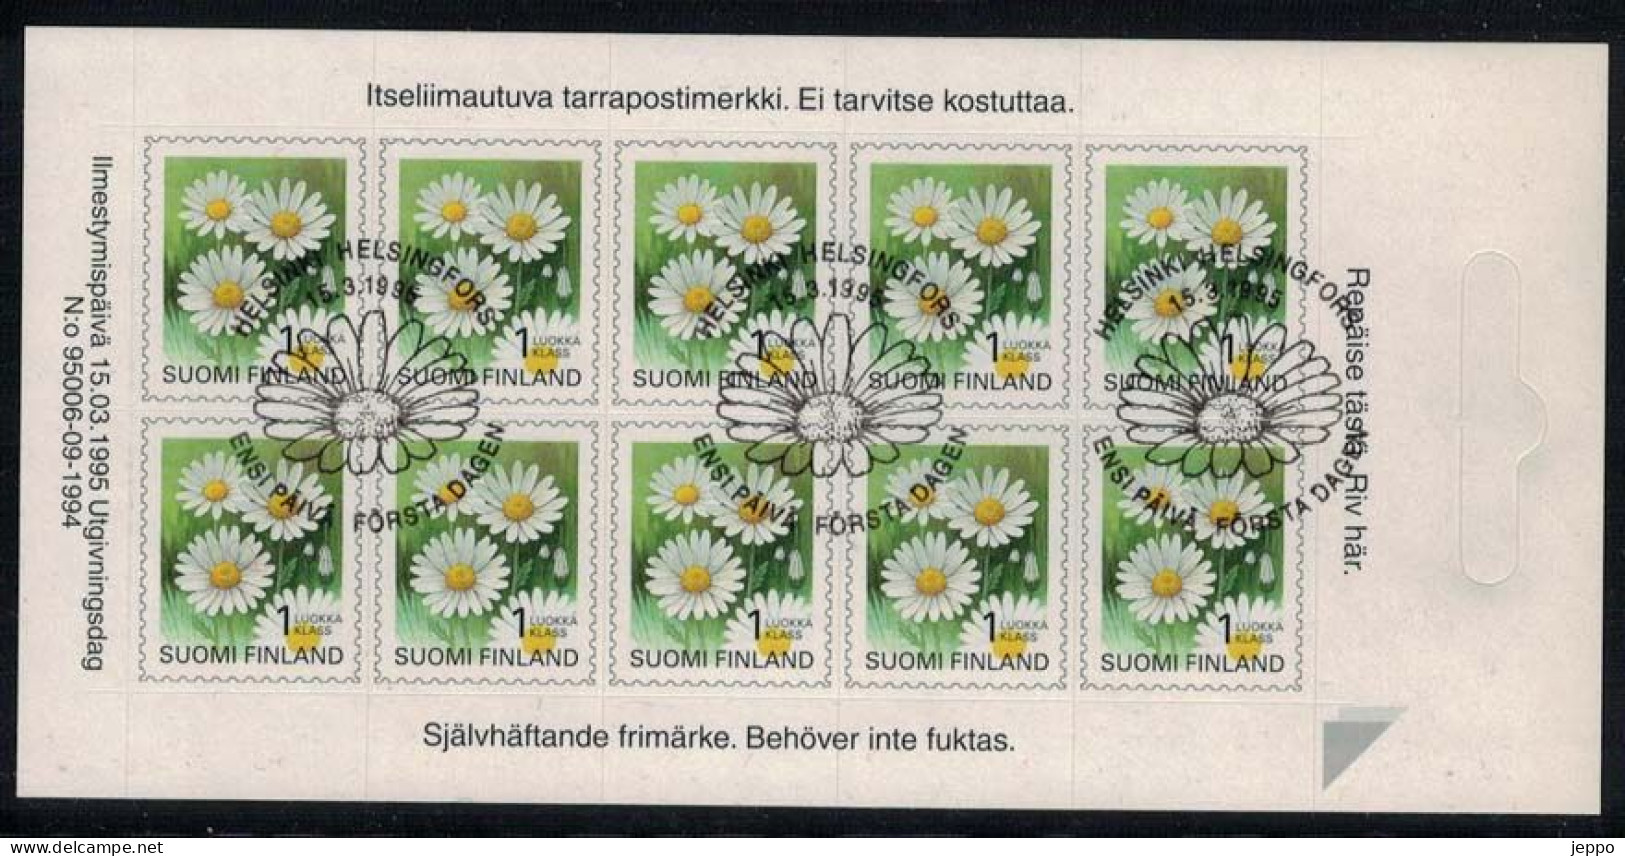 1995 Finland, Flowers, FD Stamped Sheet. M 1296. - Used Stamps